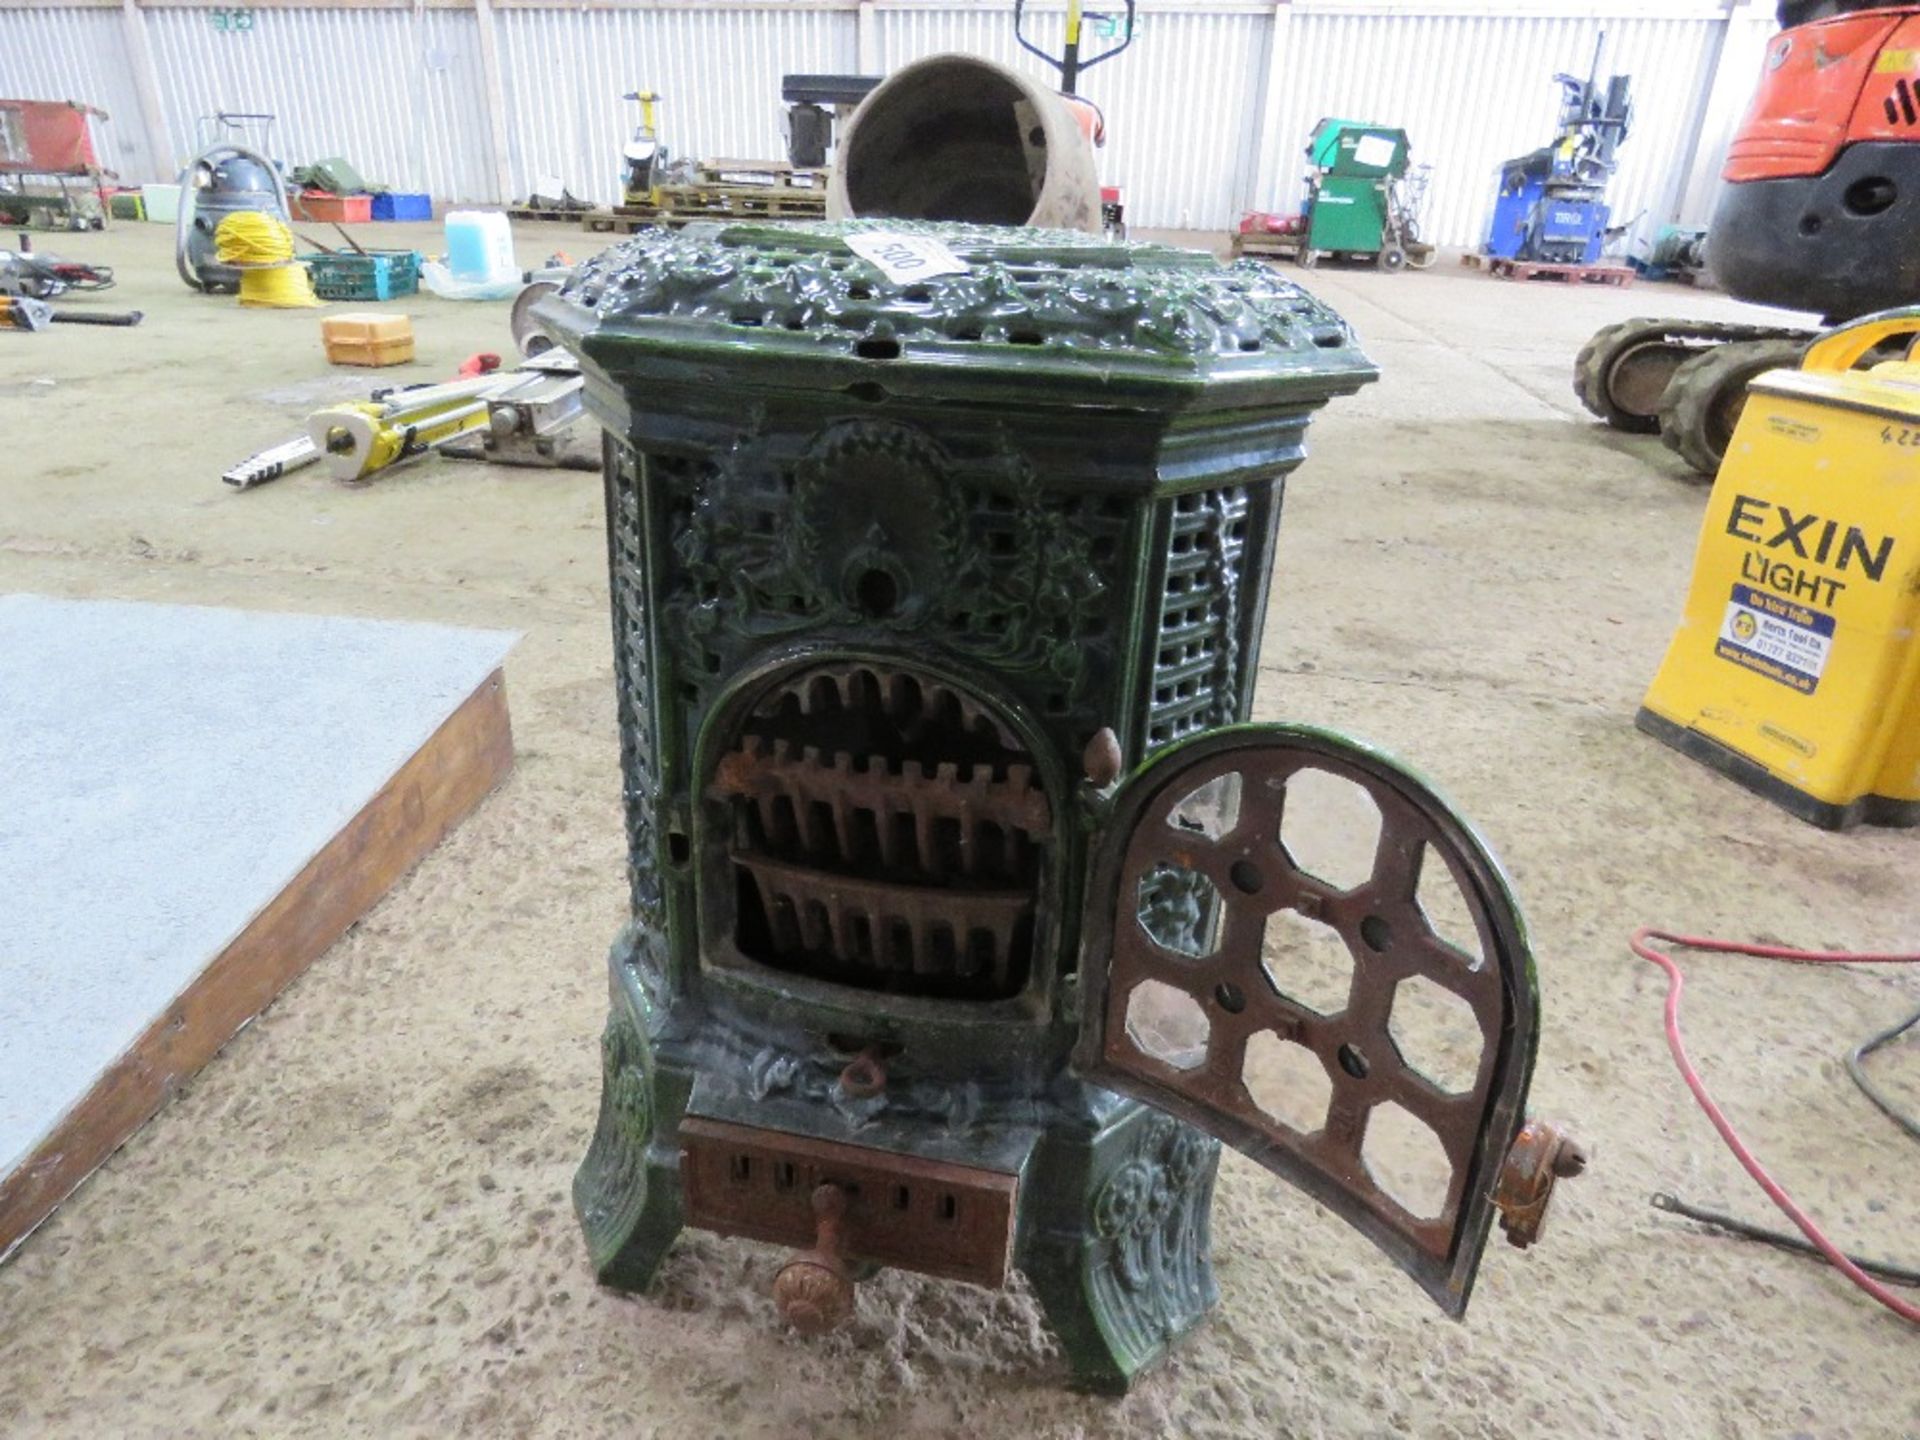 GREEN ENAMELLED CAST IRON STOVE. - Image 3 of 3